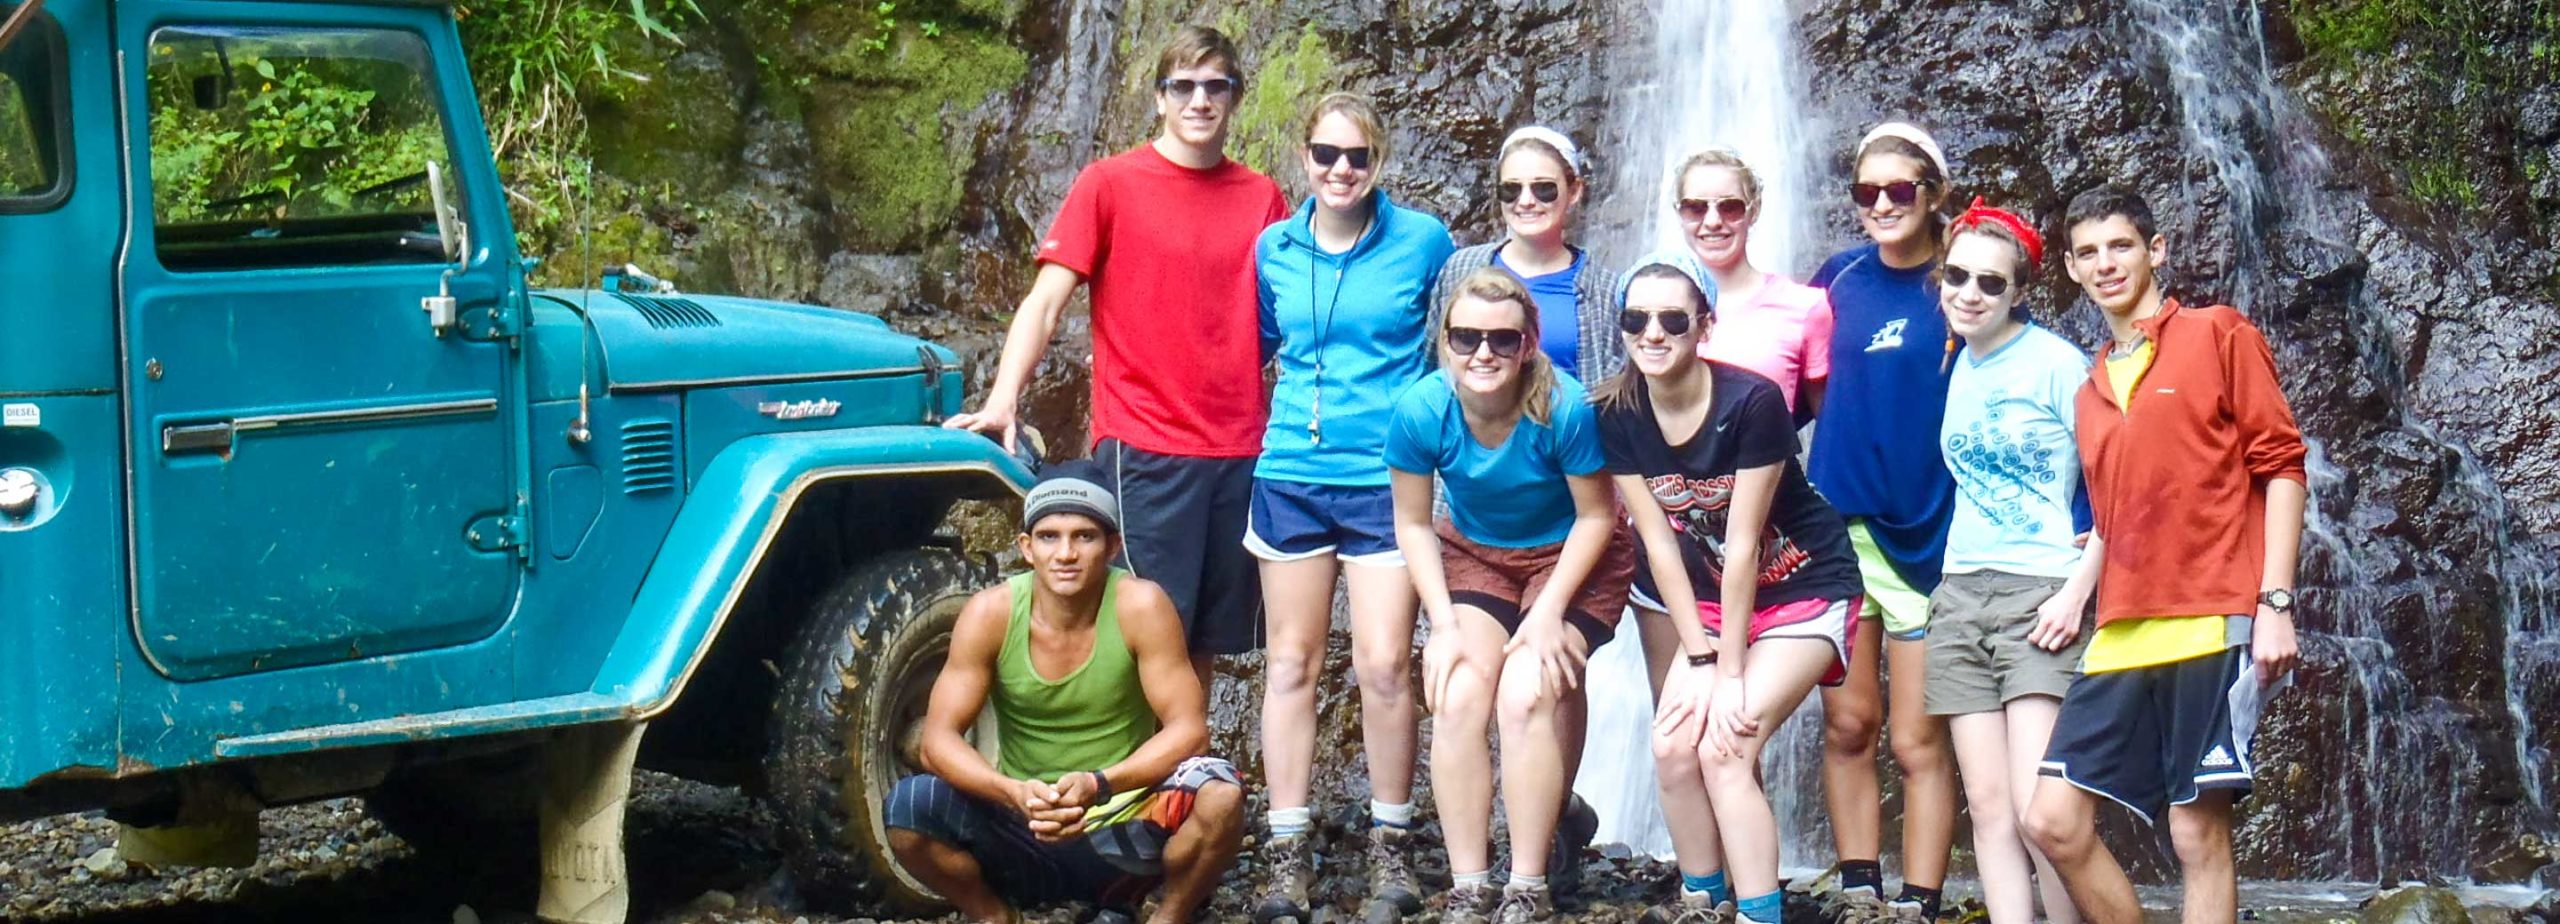 Group of teens standing by truck and waterfall